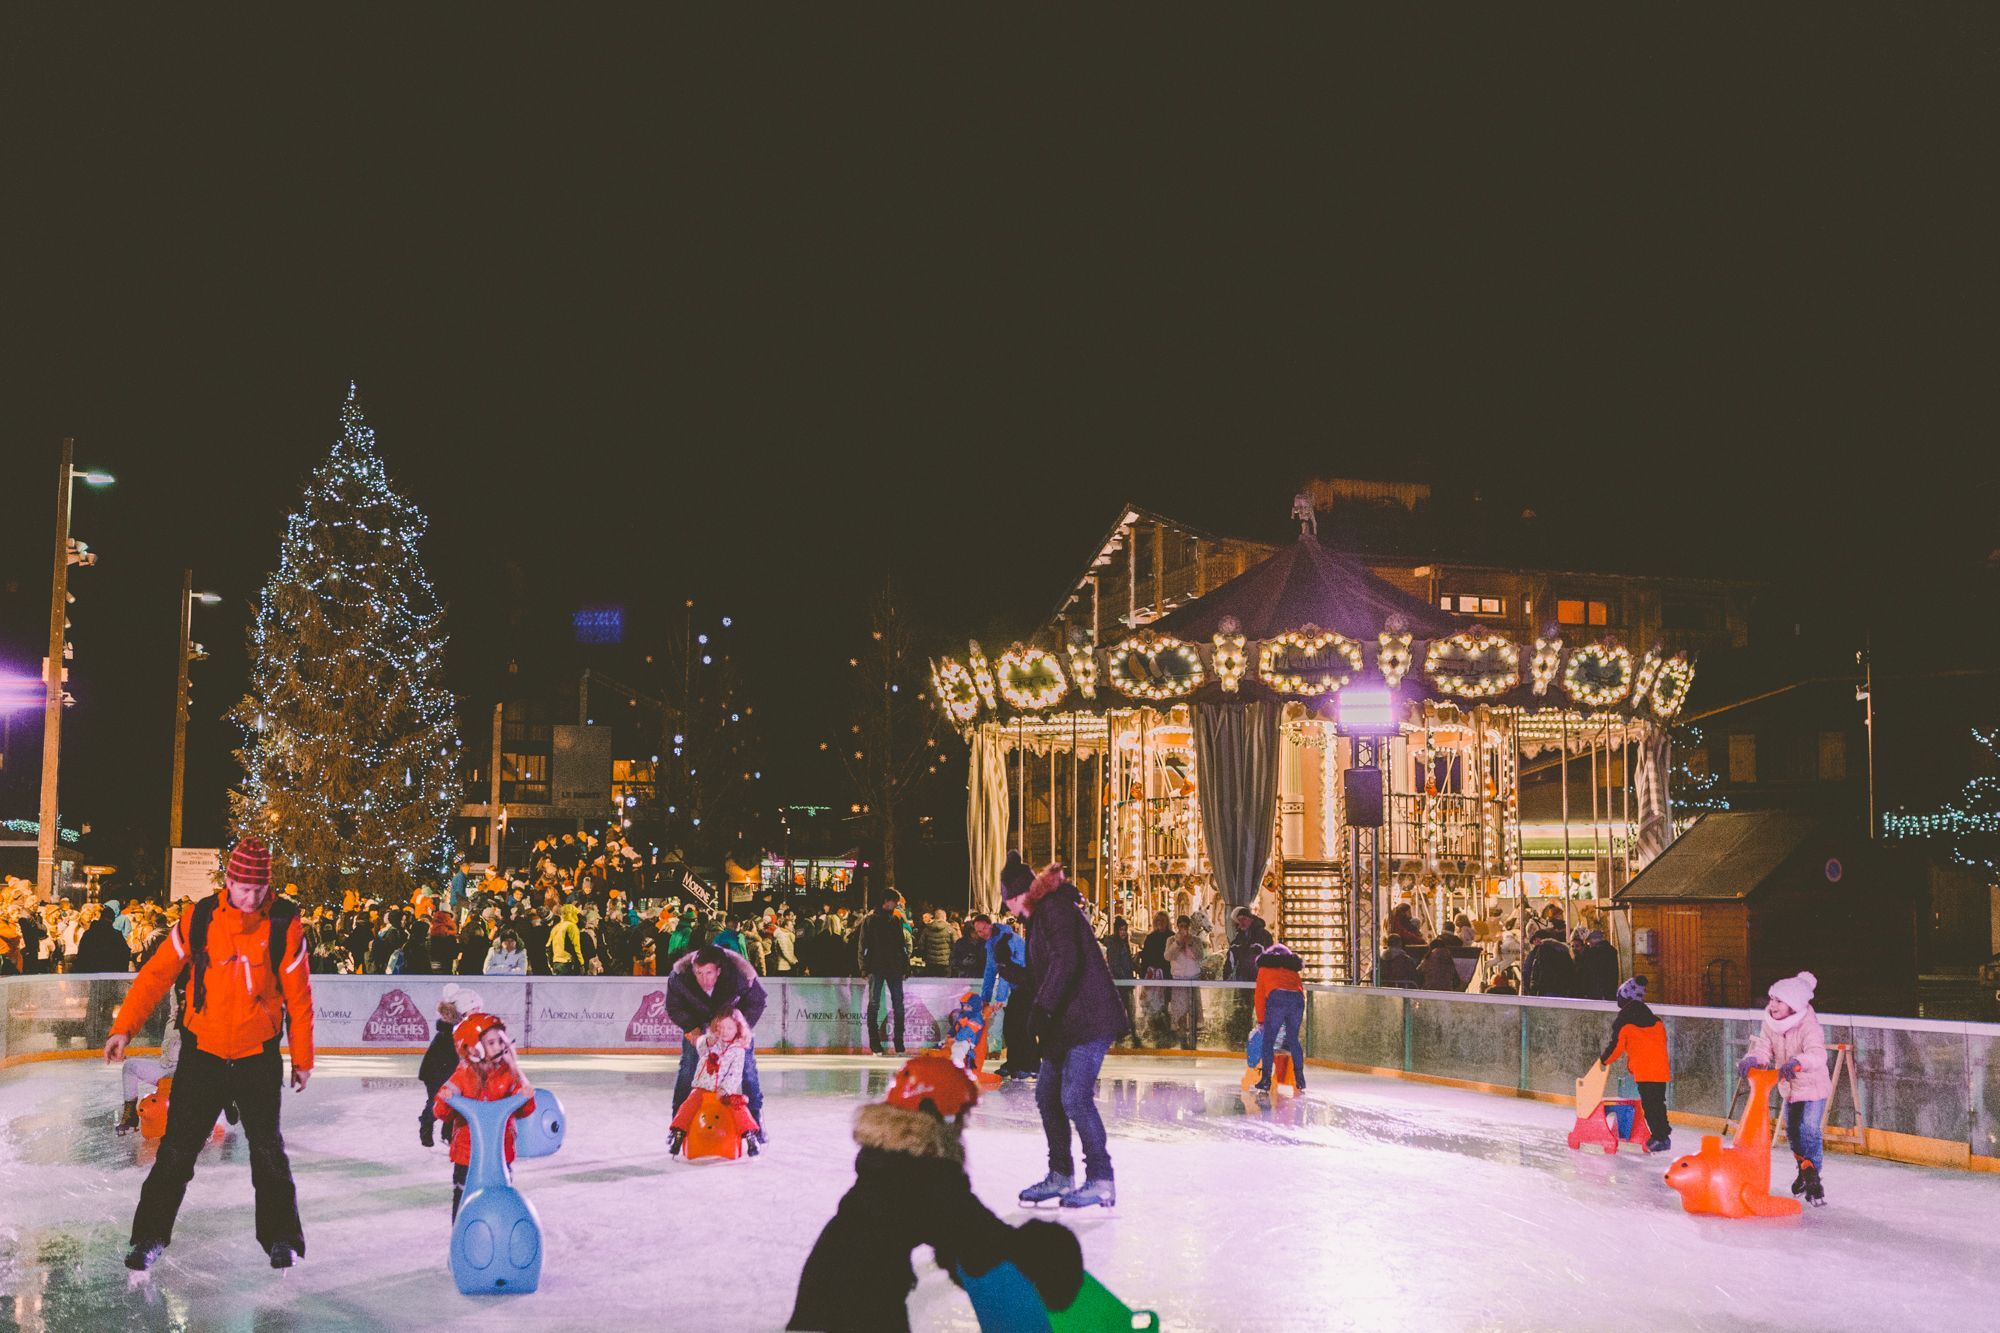 Christmas in Morzine. Image showing families ice skating in front of the Carousel and Christmas tree.